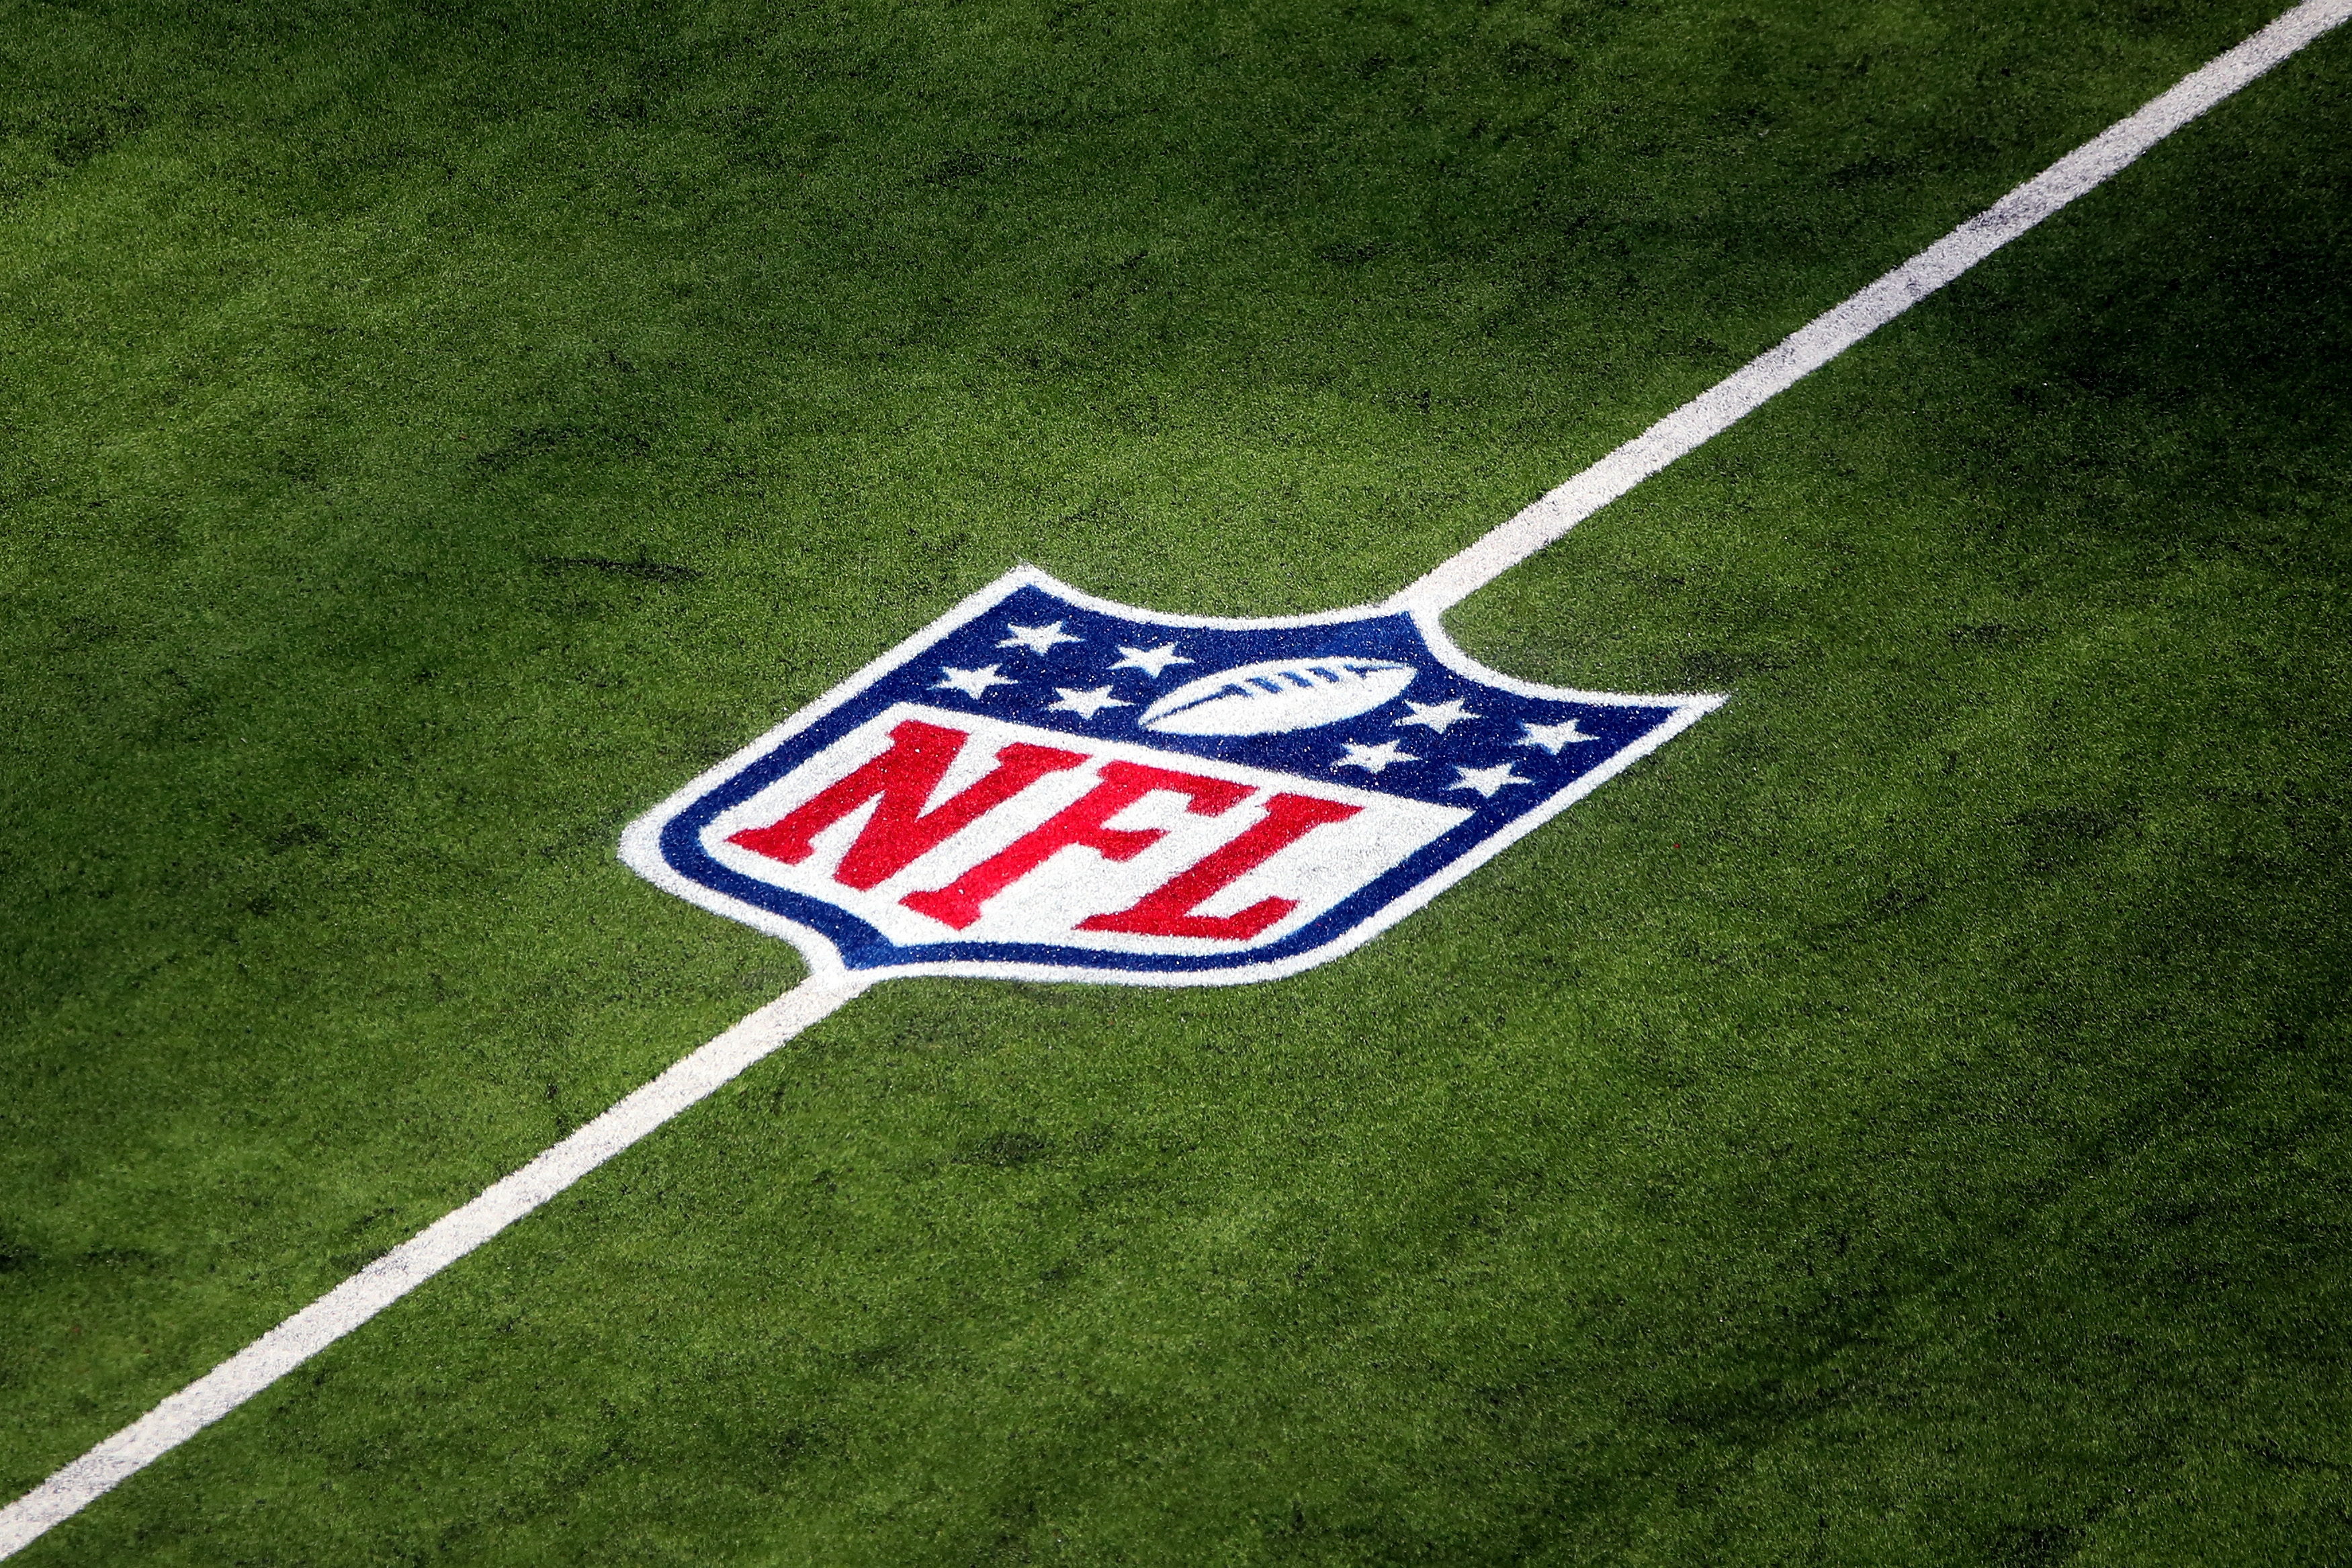 NFL games in Germany next month will be played on a hybrid field